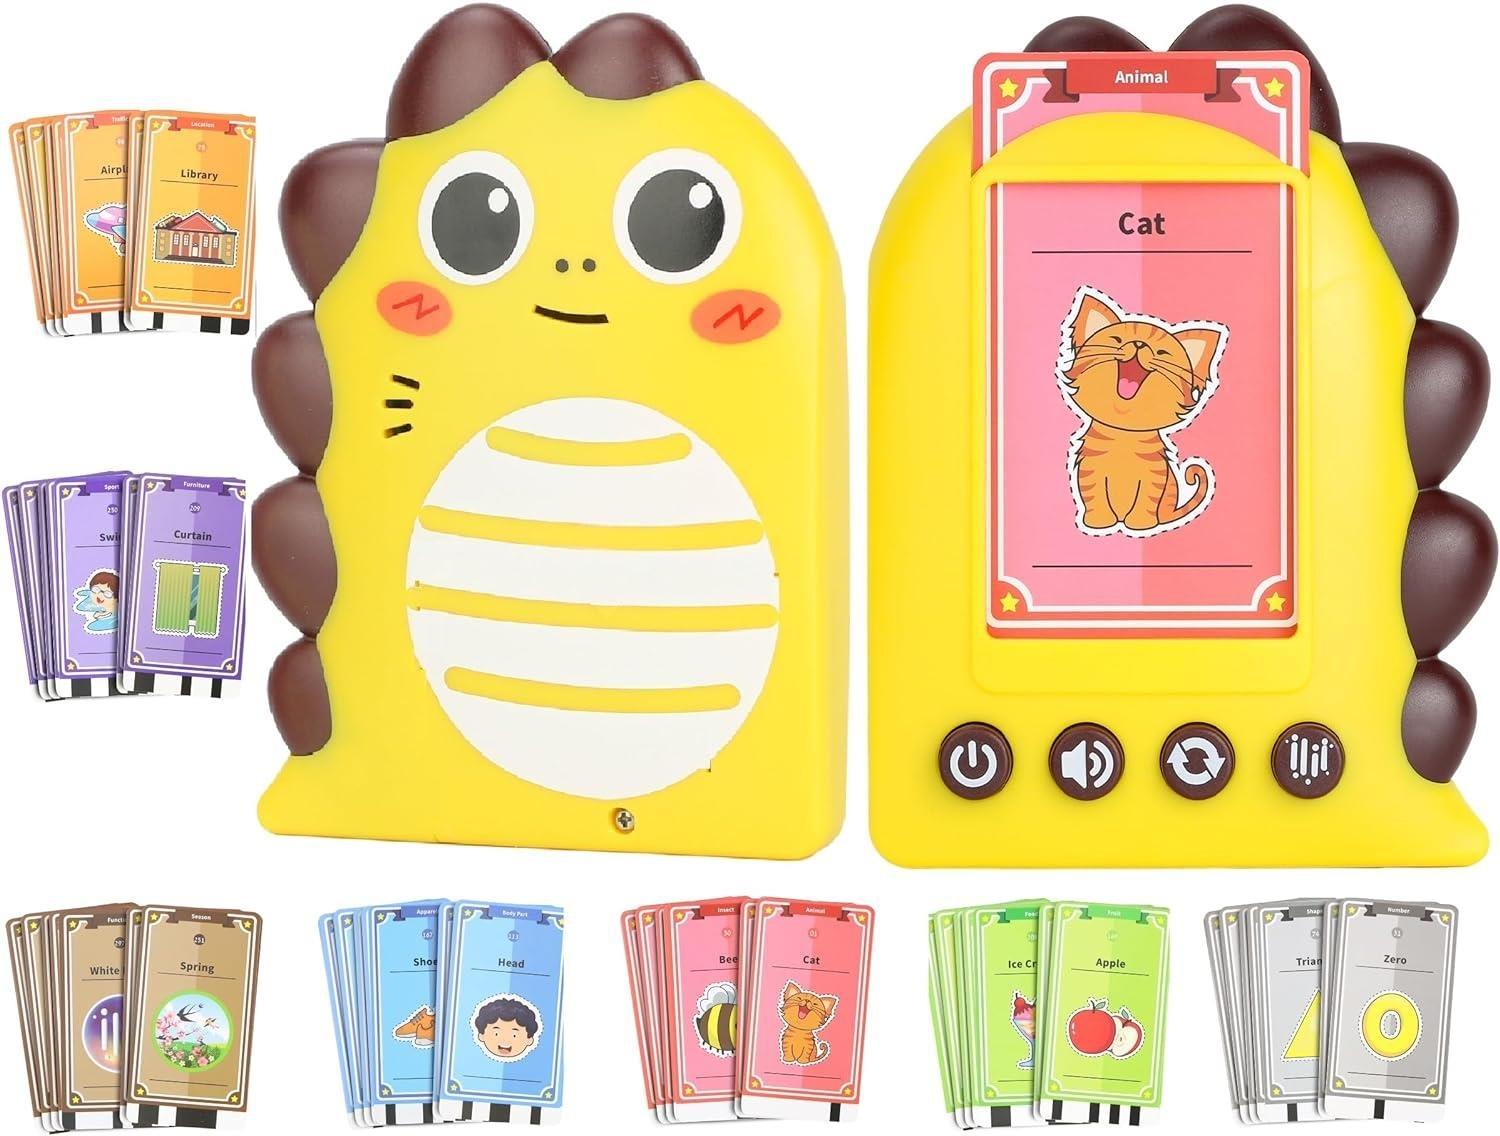 Talking Flash Cards - Early Learning Toy for Toddlers with 150 Cards